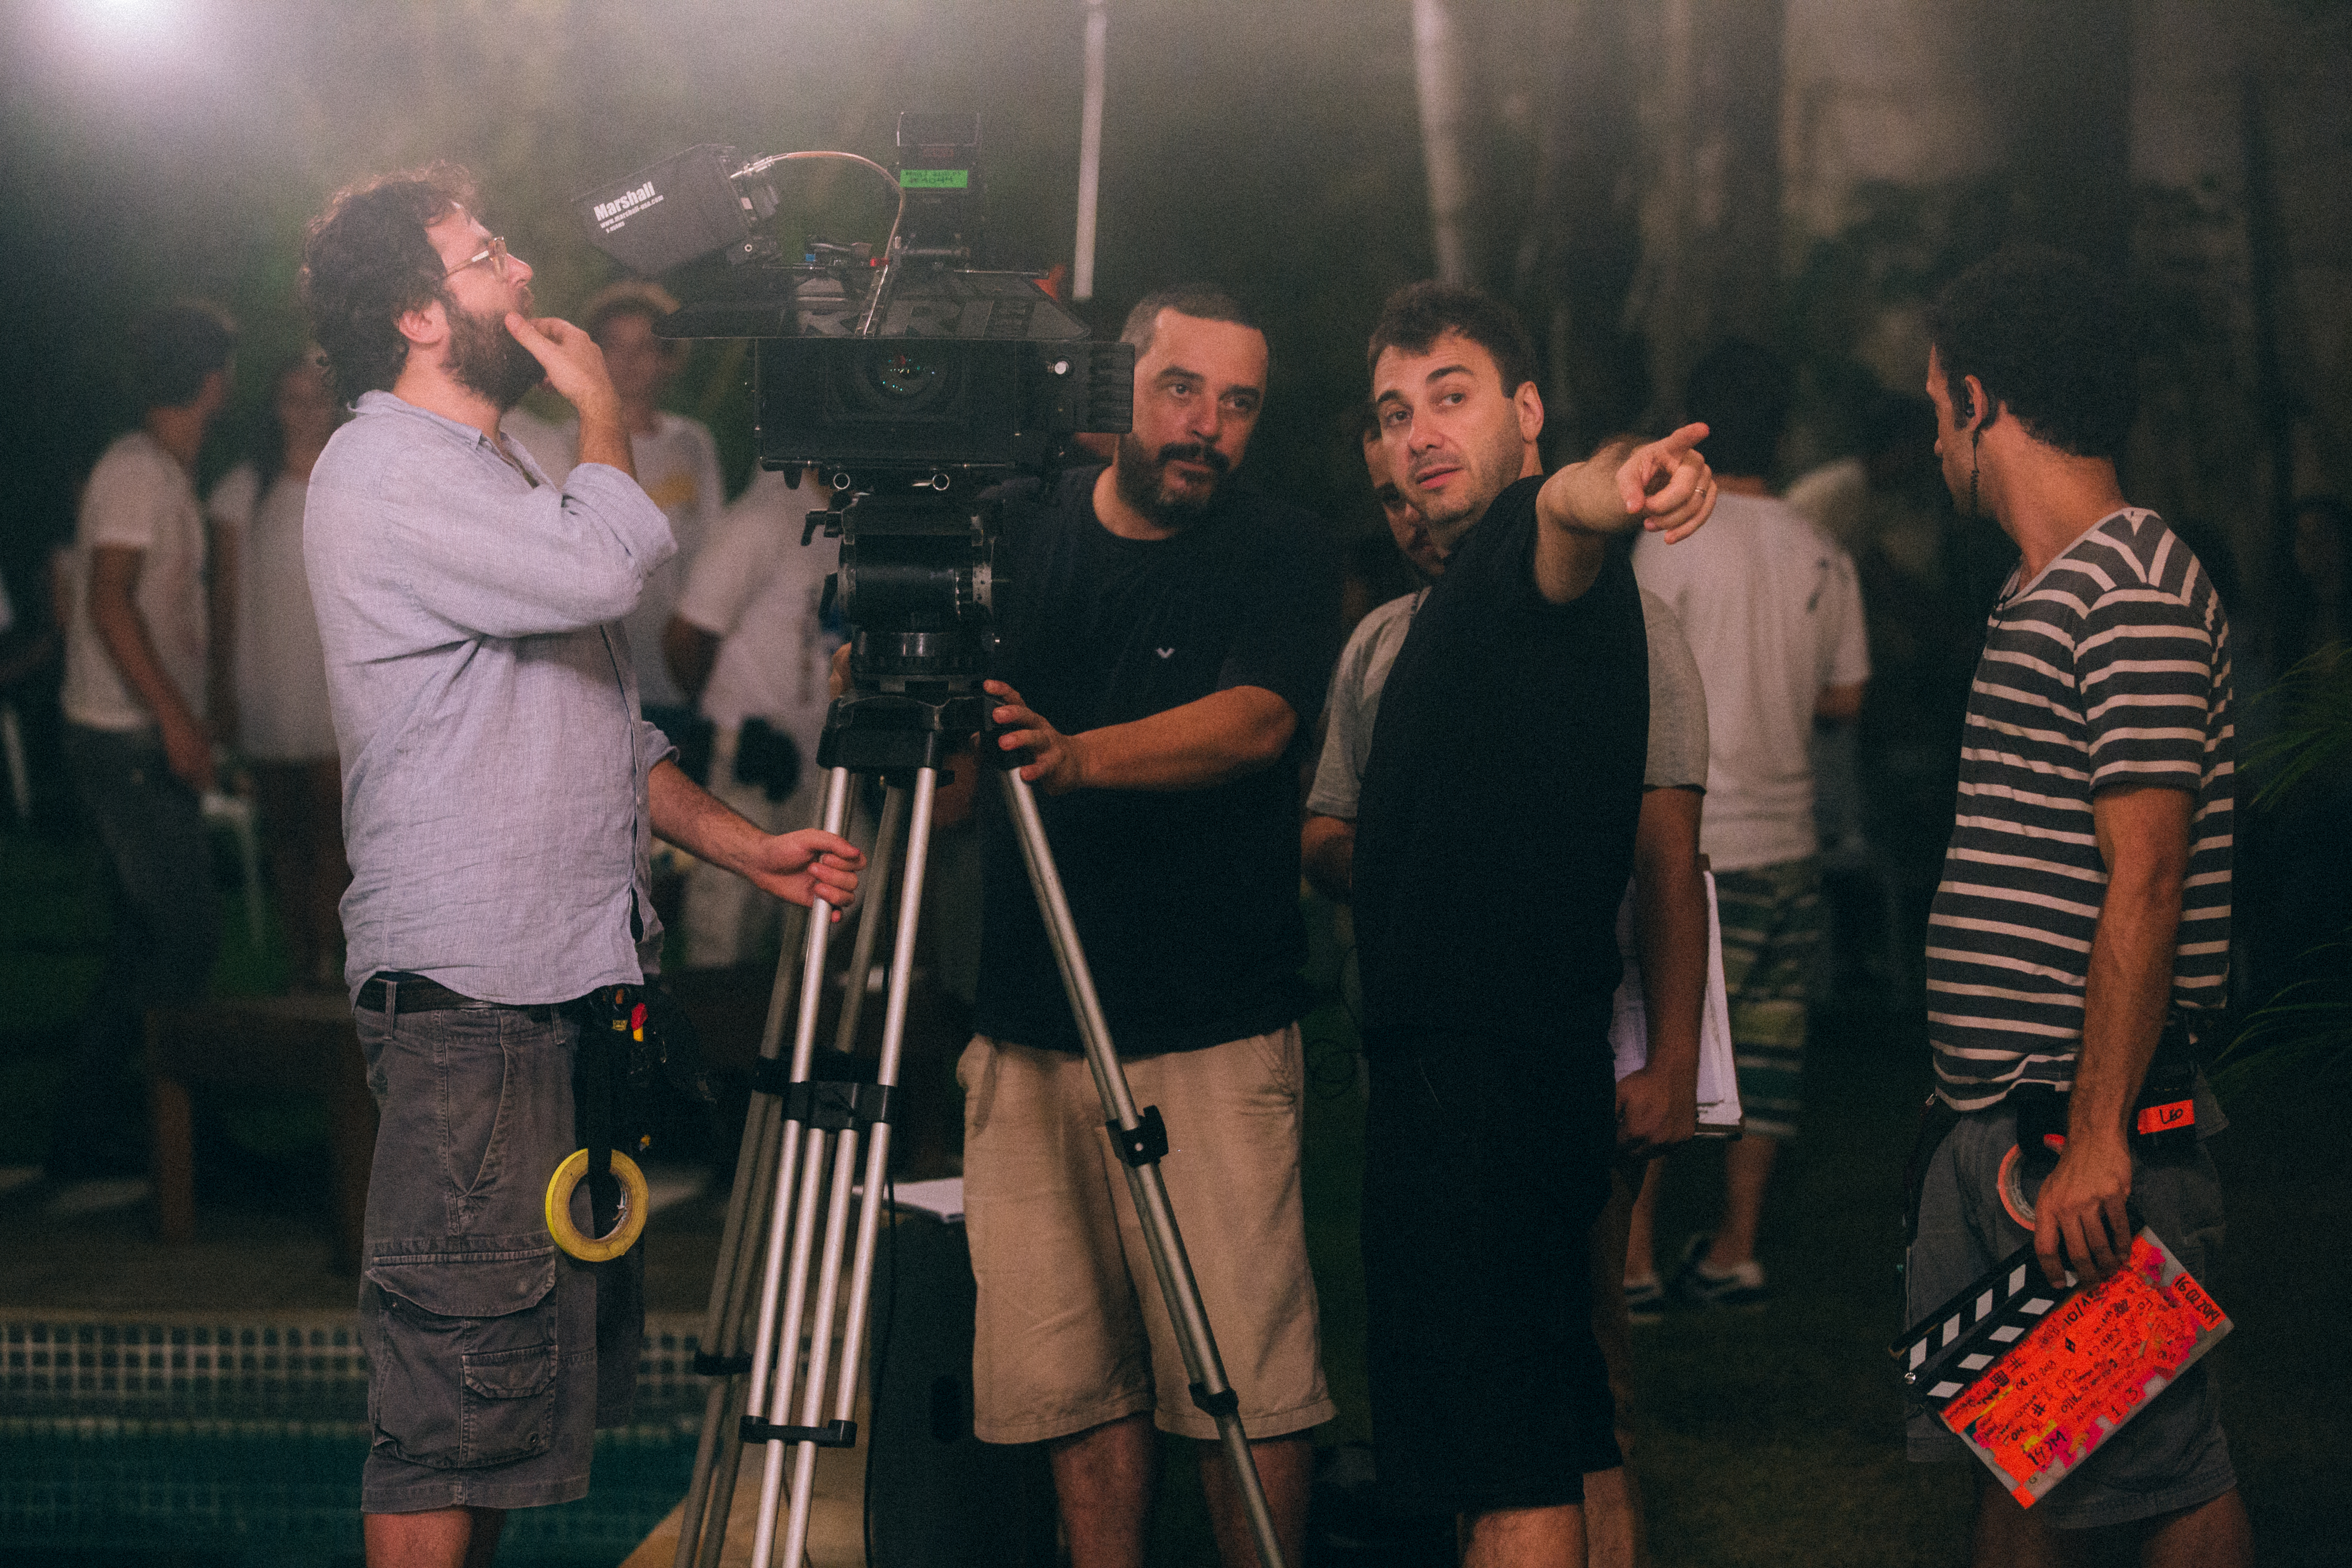 Alex Medeiros gives instructions to director of photography, Alexandre Berra, during the shoot of #thosegirls.